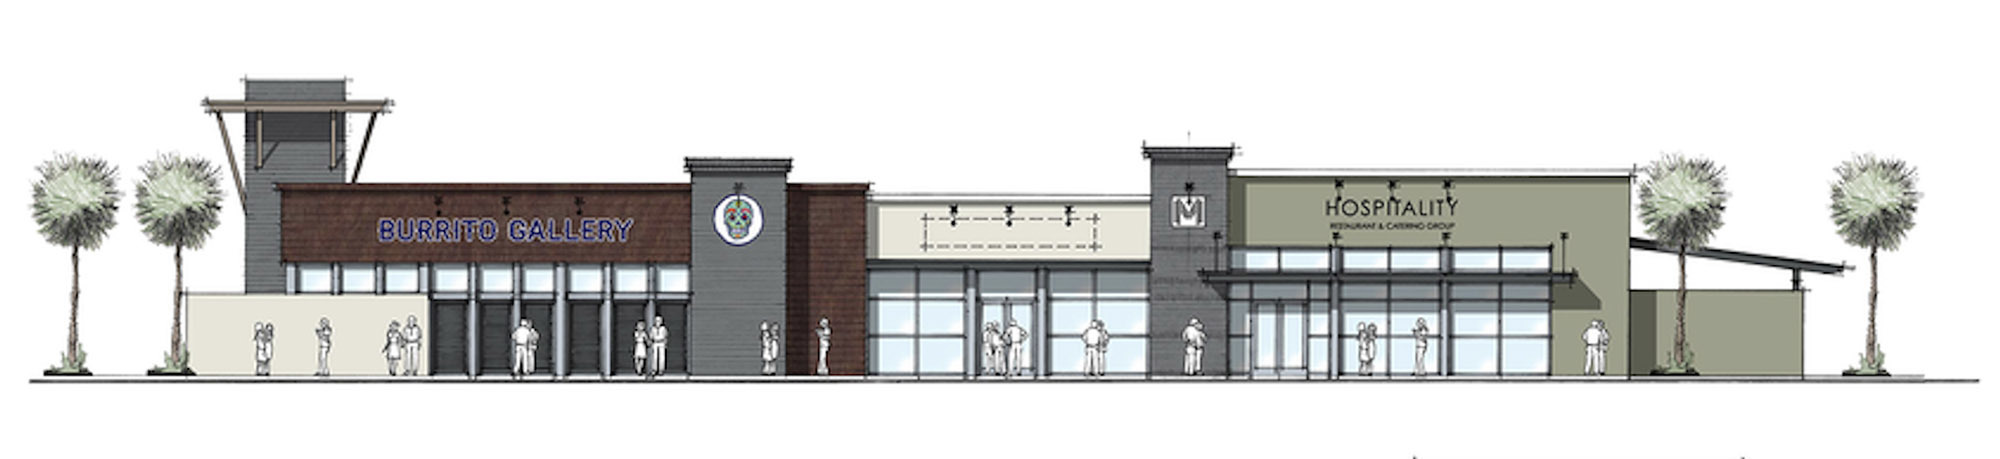 Rendering of a retail building will sit on 1.77 acres of the 18.5-acre project area at southwest Gate Parkway and Deerwood Park Boulevard.